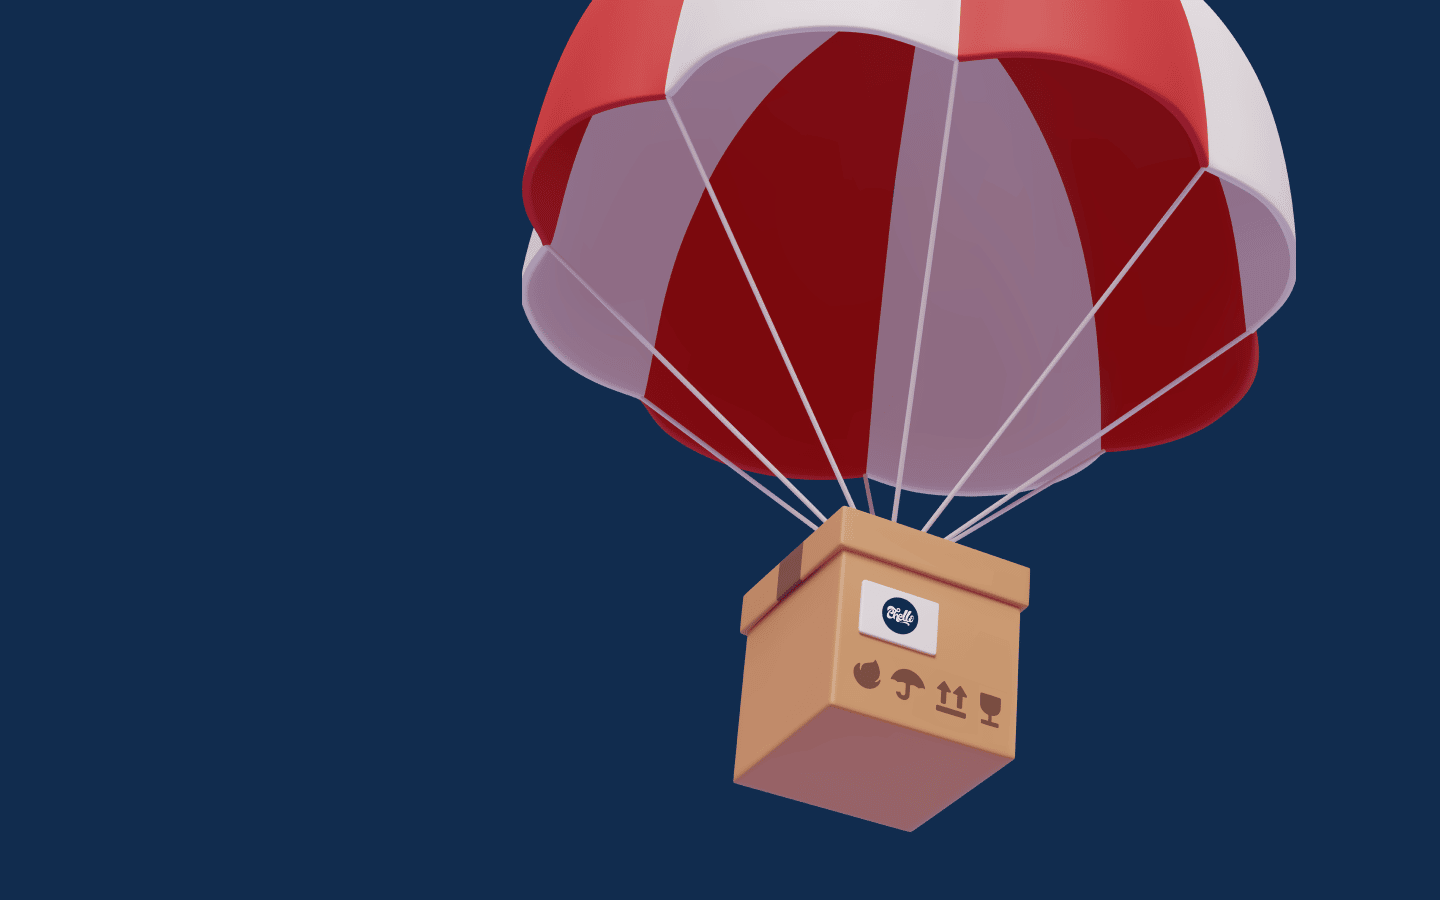 Chello branded filing box floating down on a parachute.